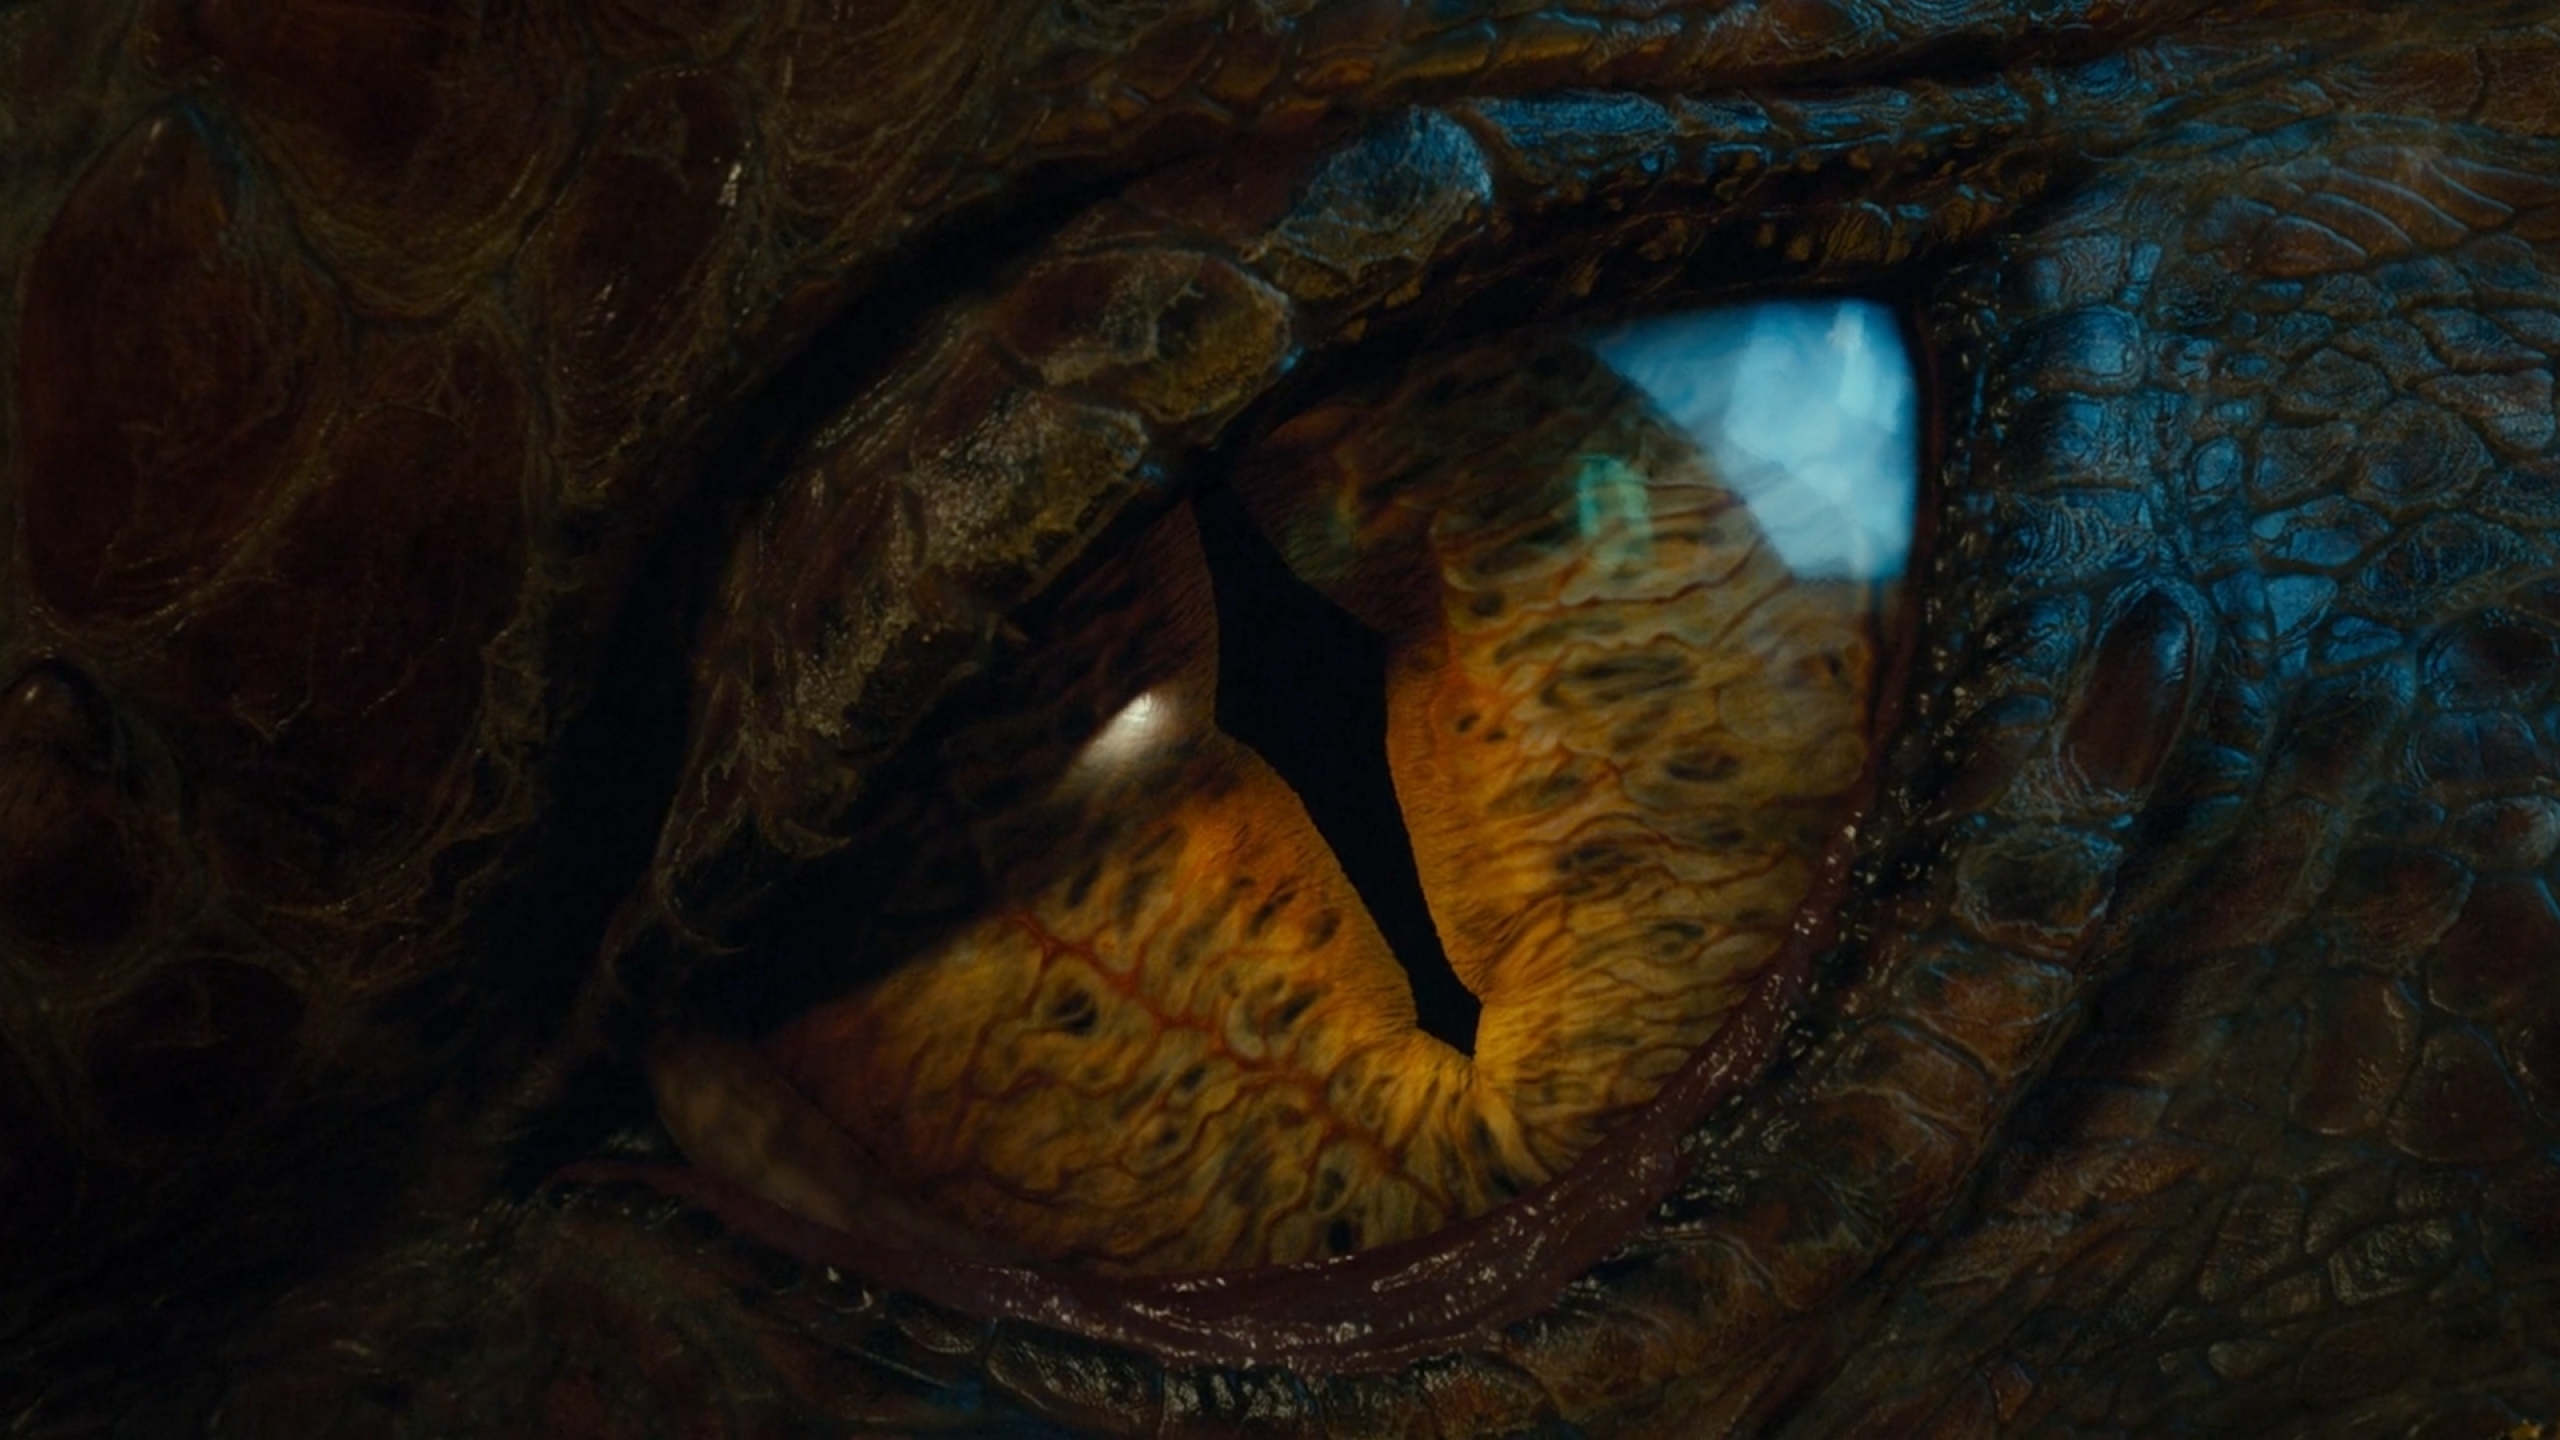 Eyes Dragons The Hobbit Smaug Best Wallpaper Top